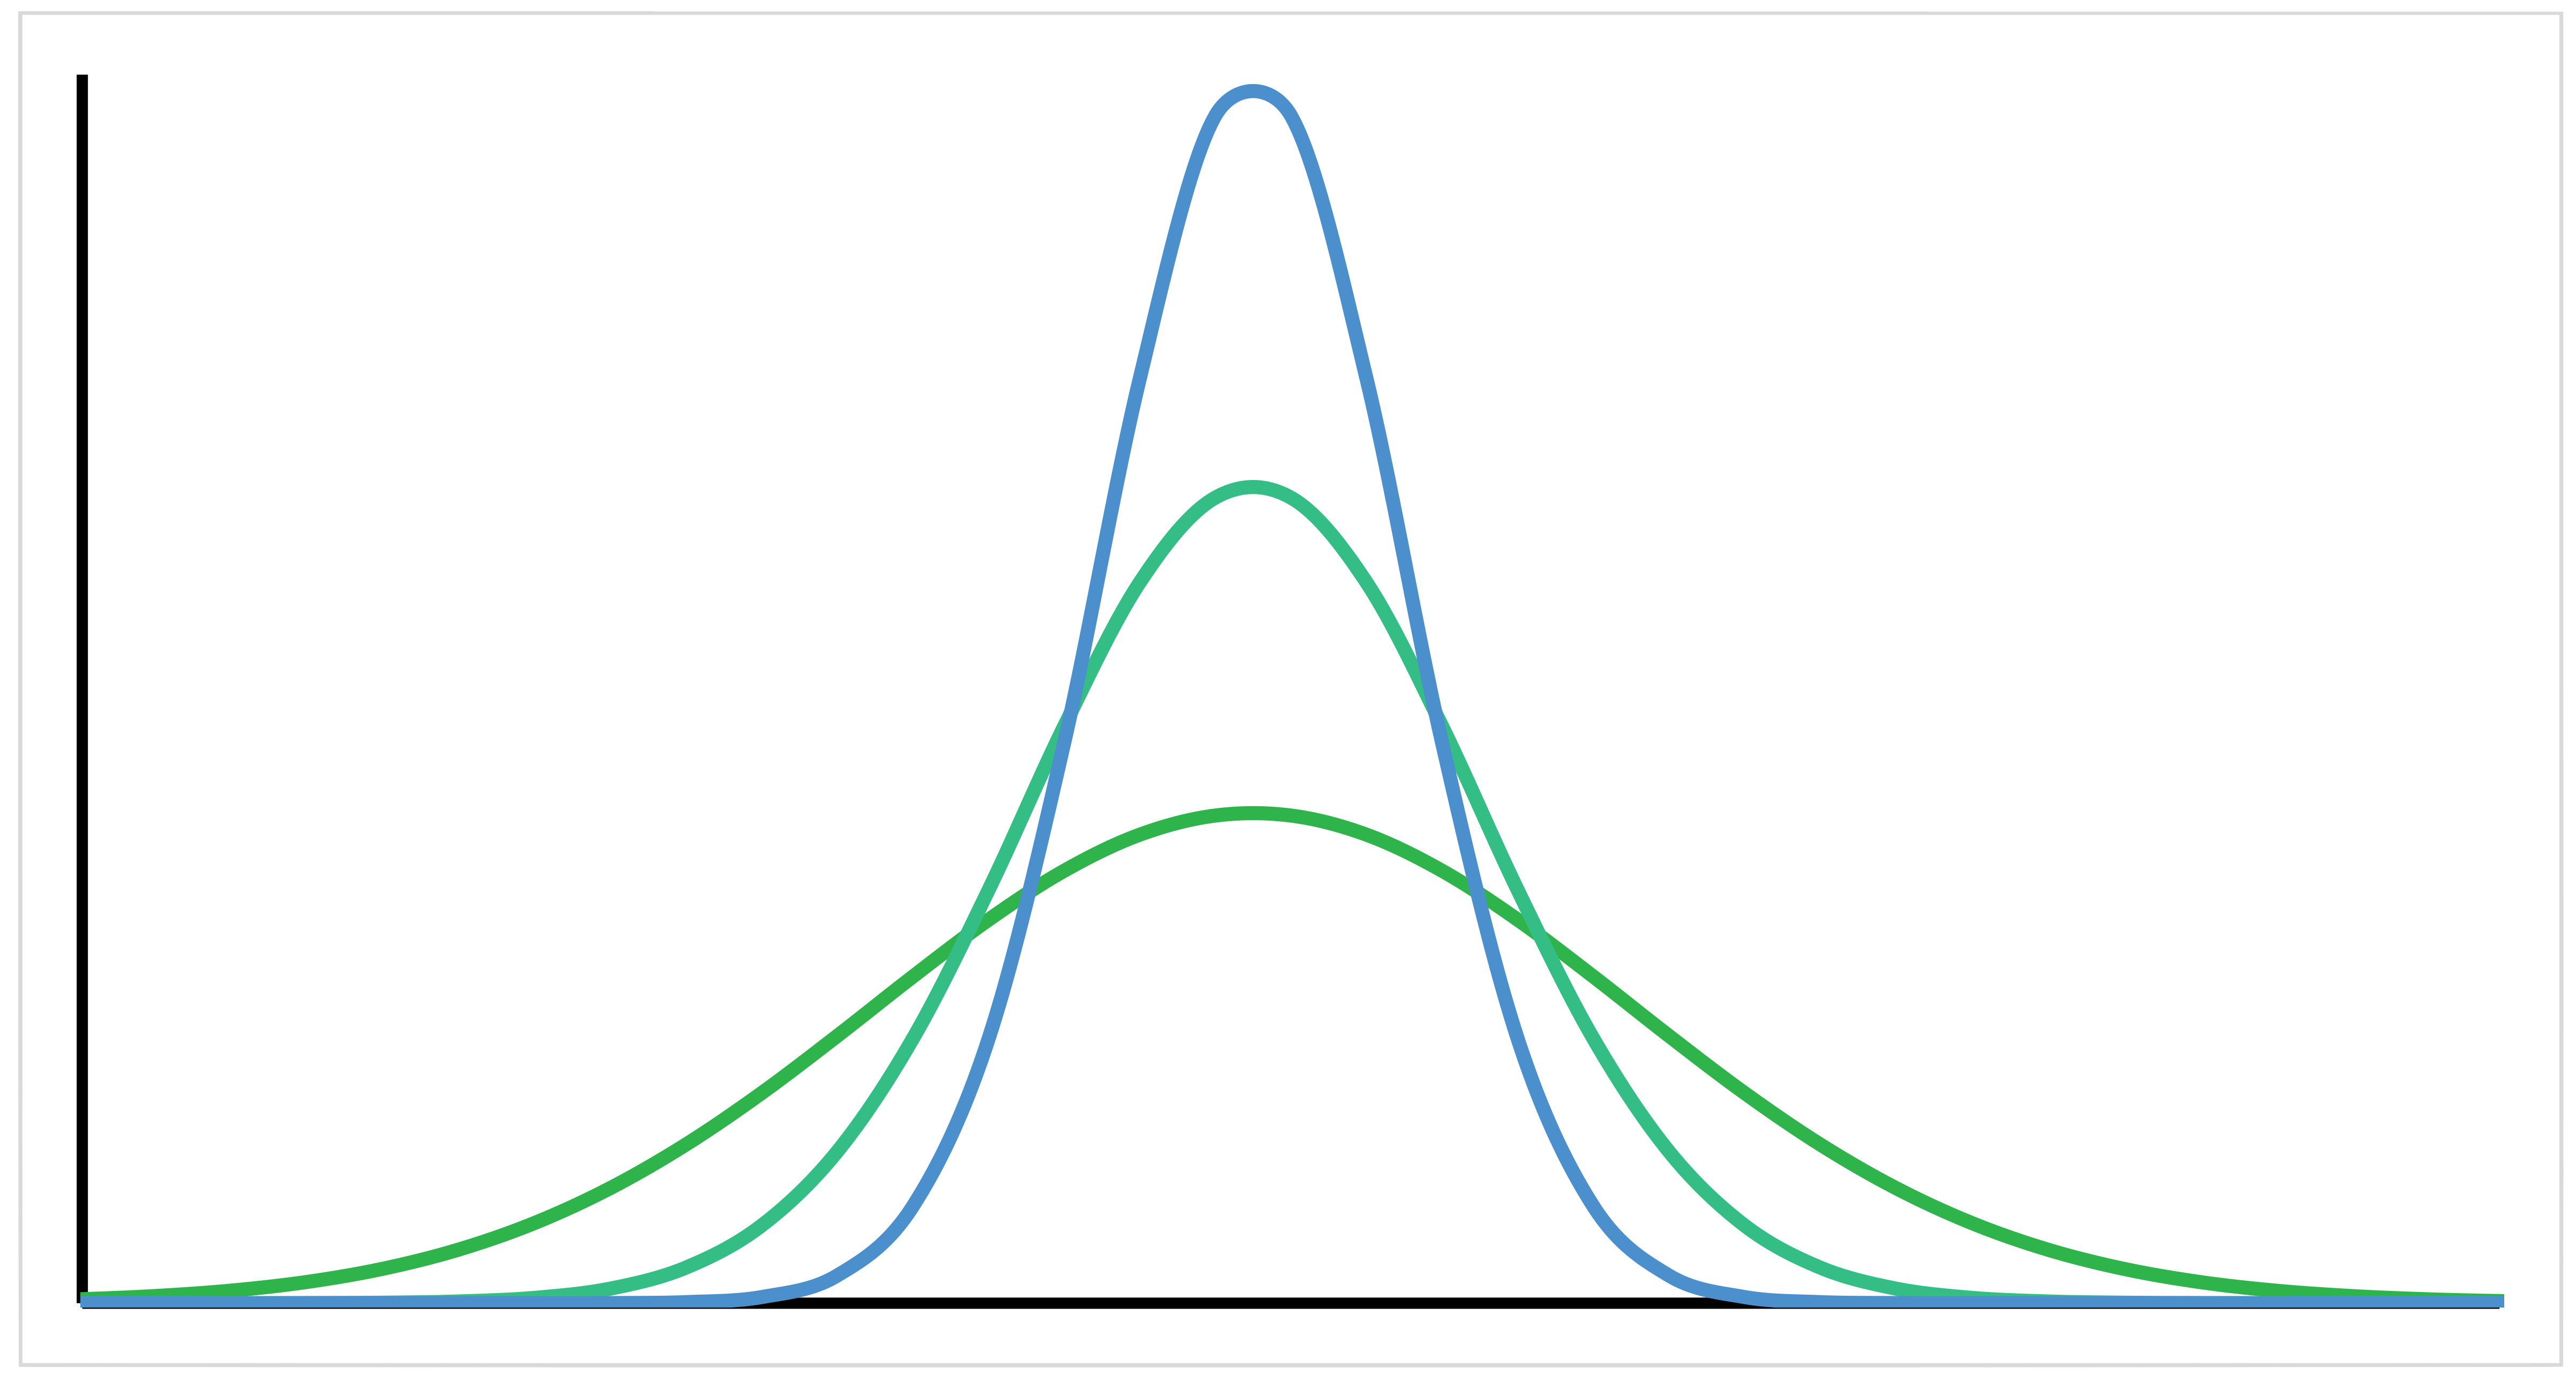 Variability of Normal Distributions